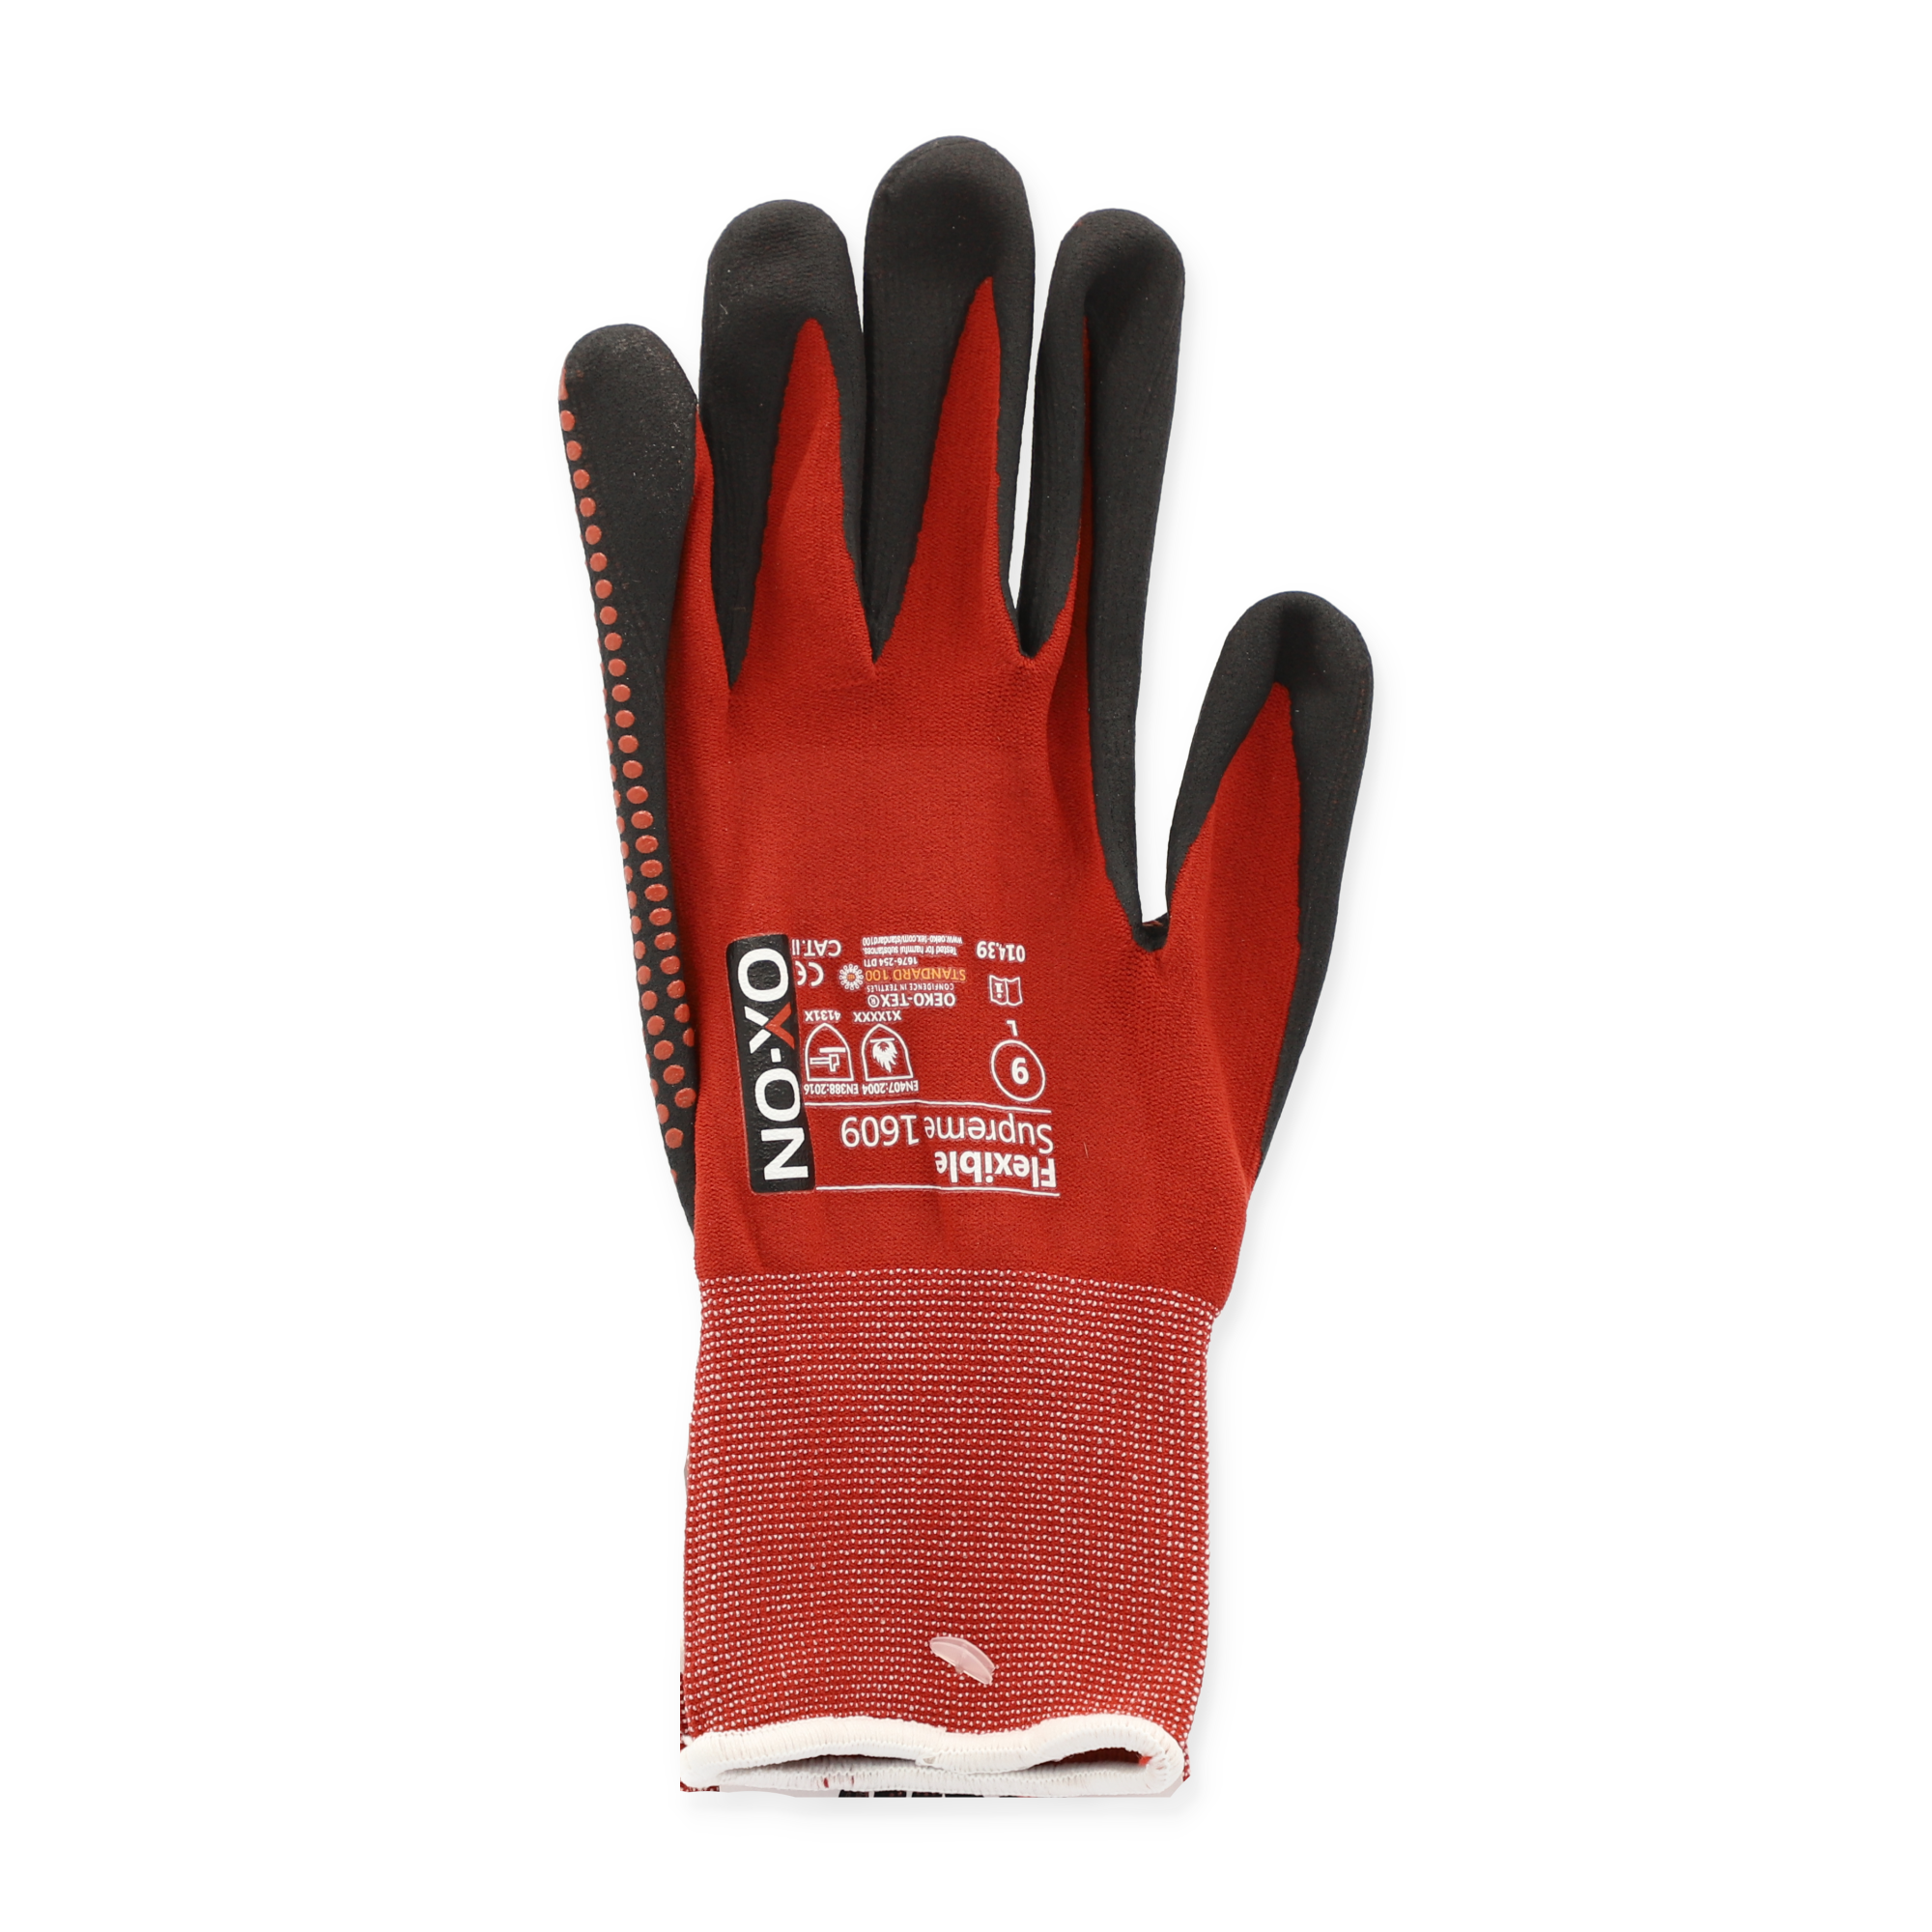 Handschuhe 'Flexible Supreme 1609' rot Gr. 9 + product picture